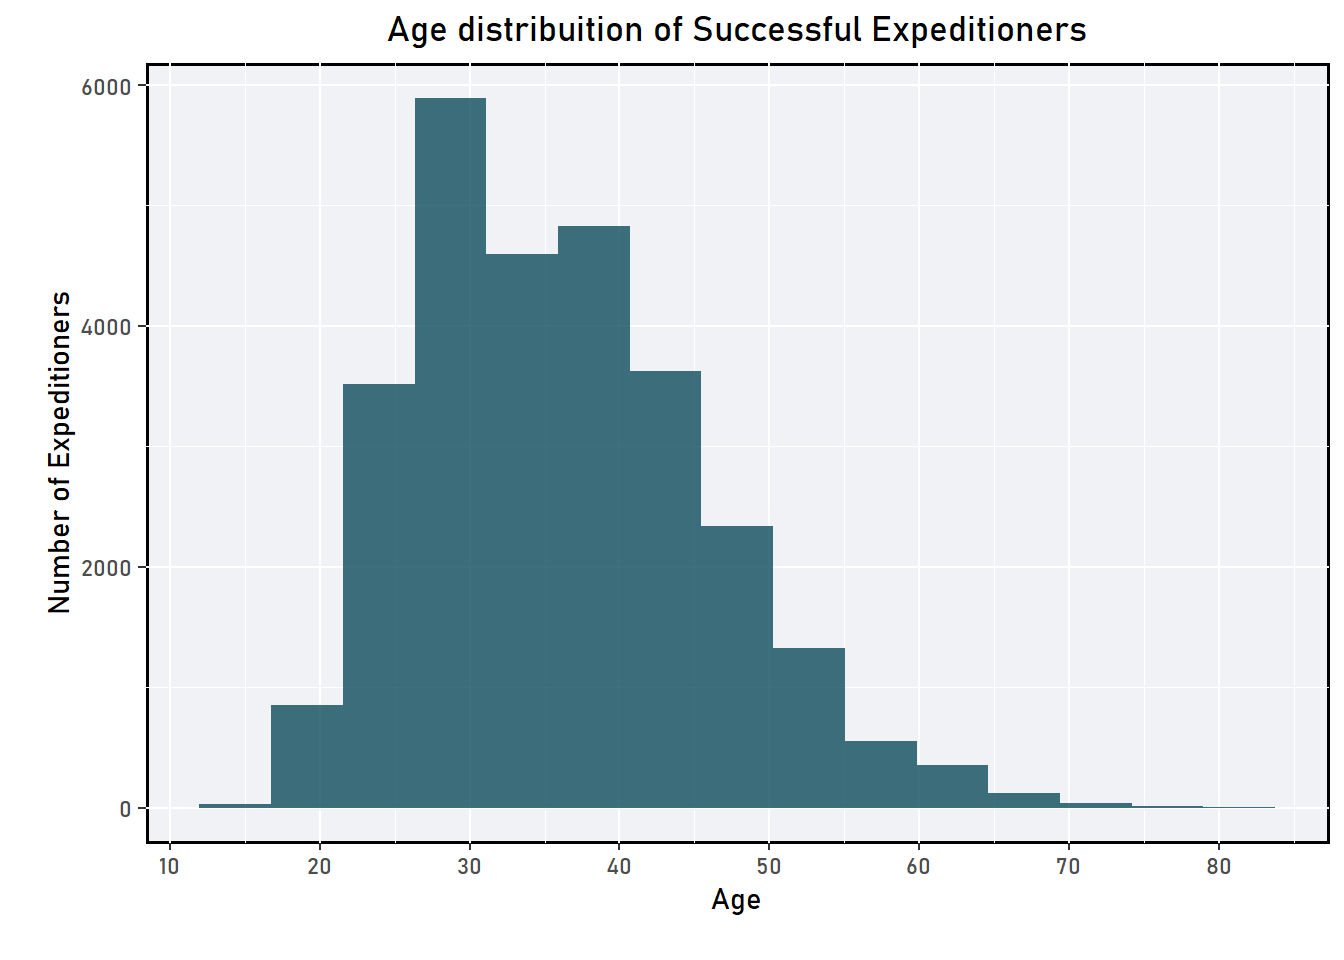 The figure shows the age distribuition of successfull expeditioners.It can be observed that majority of the expeditioners are of the age group early 20s - late 40s.